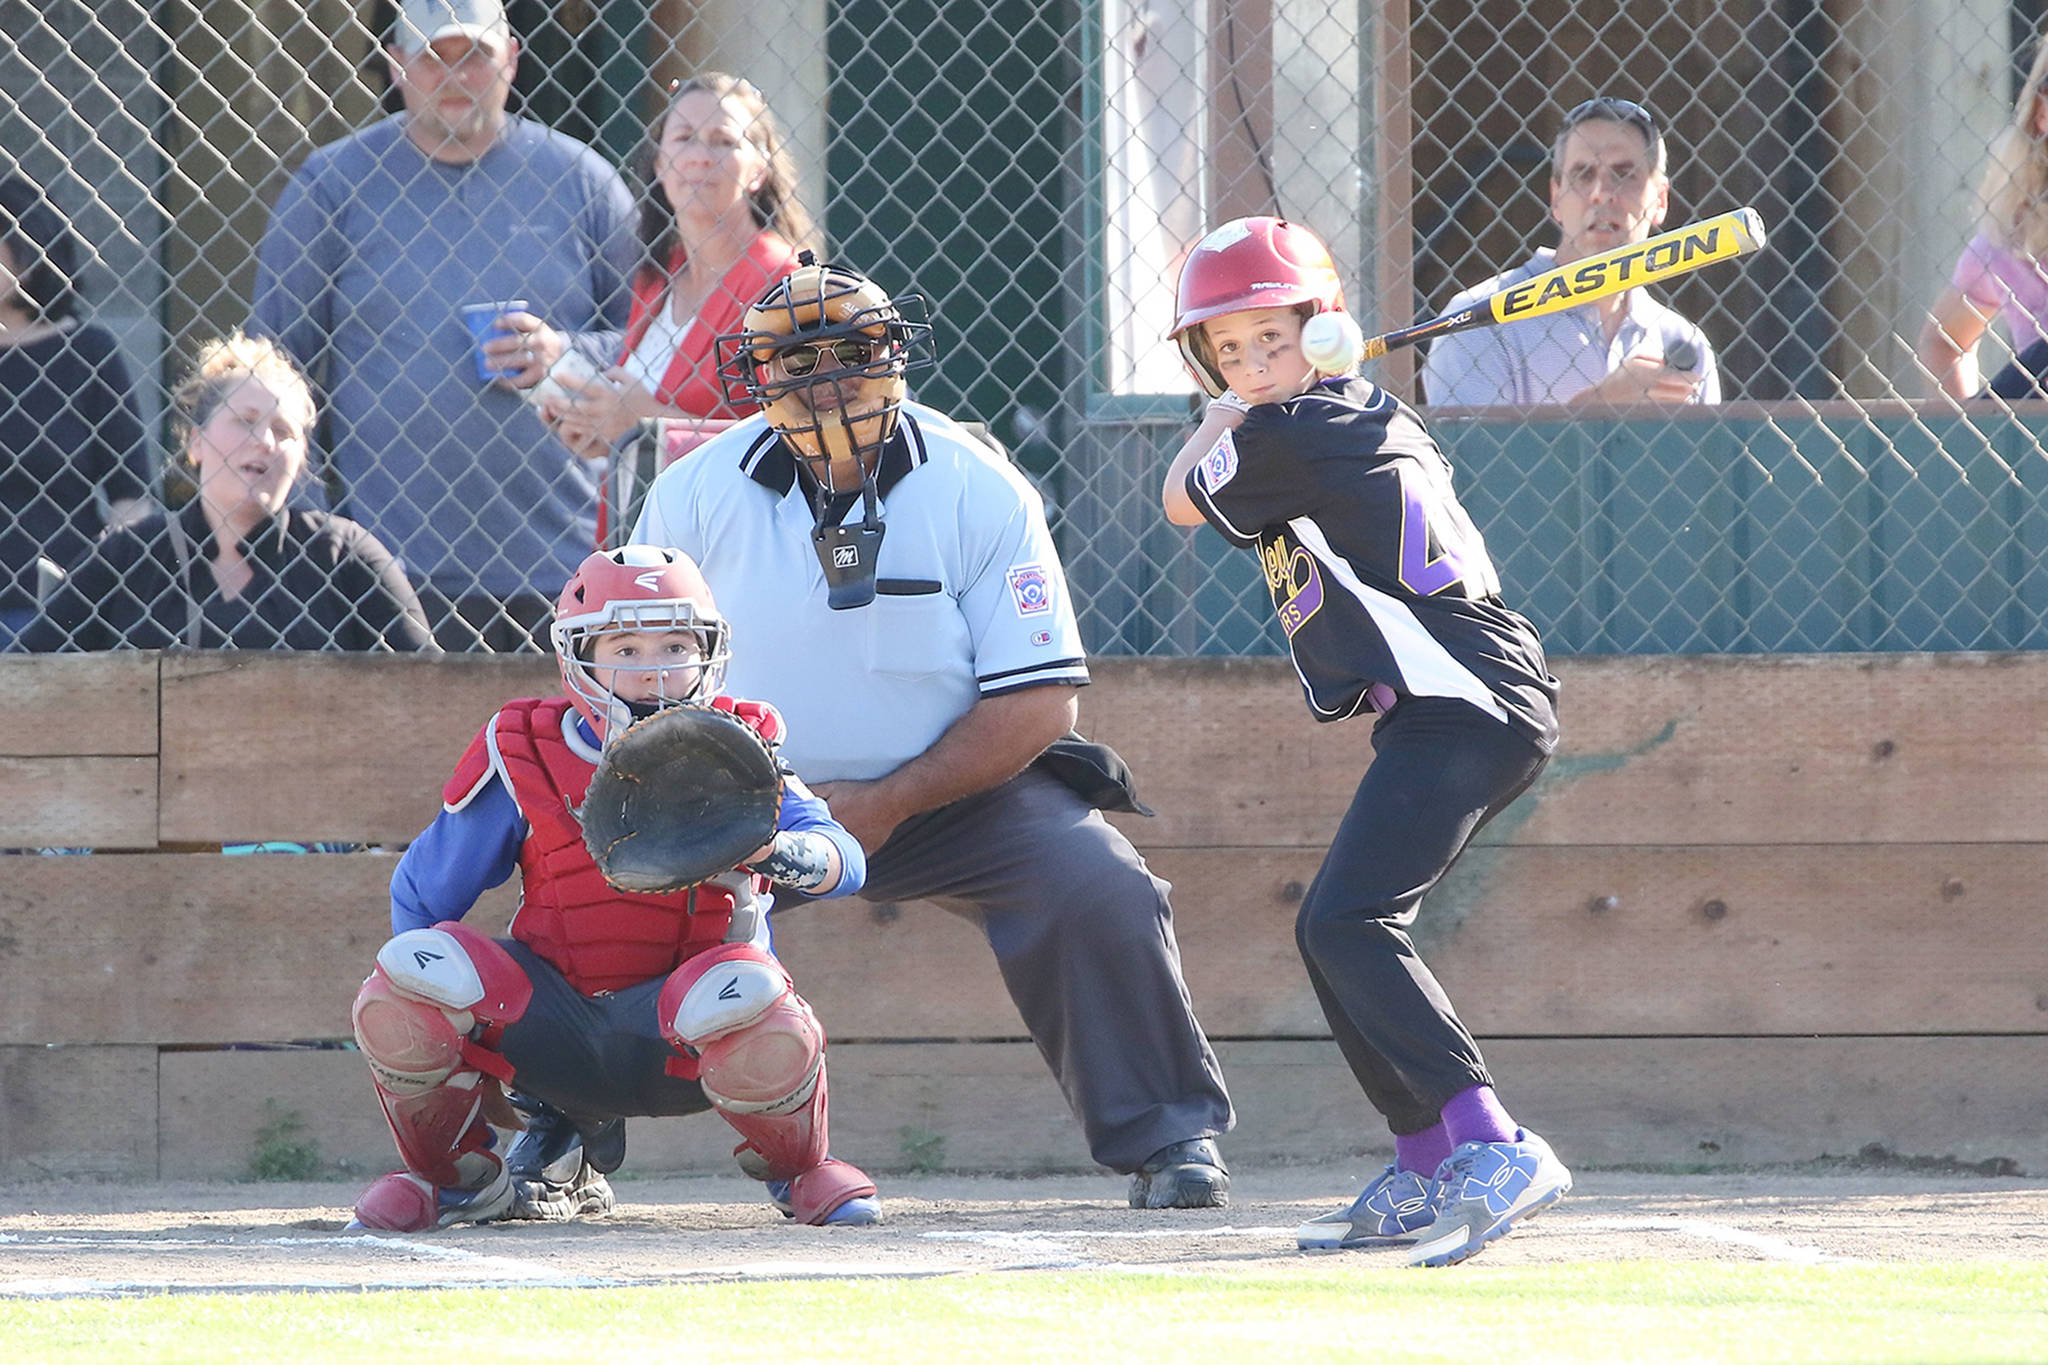 Lack of hitting, errors lead to losses at tournament